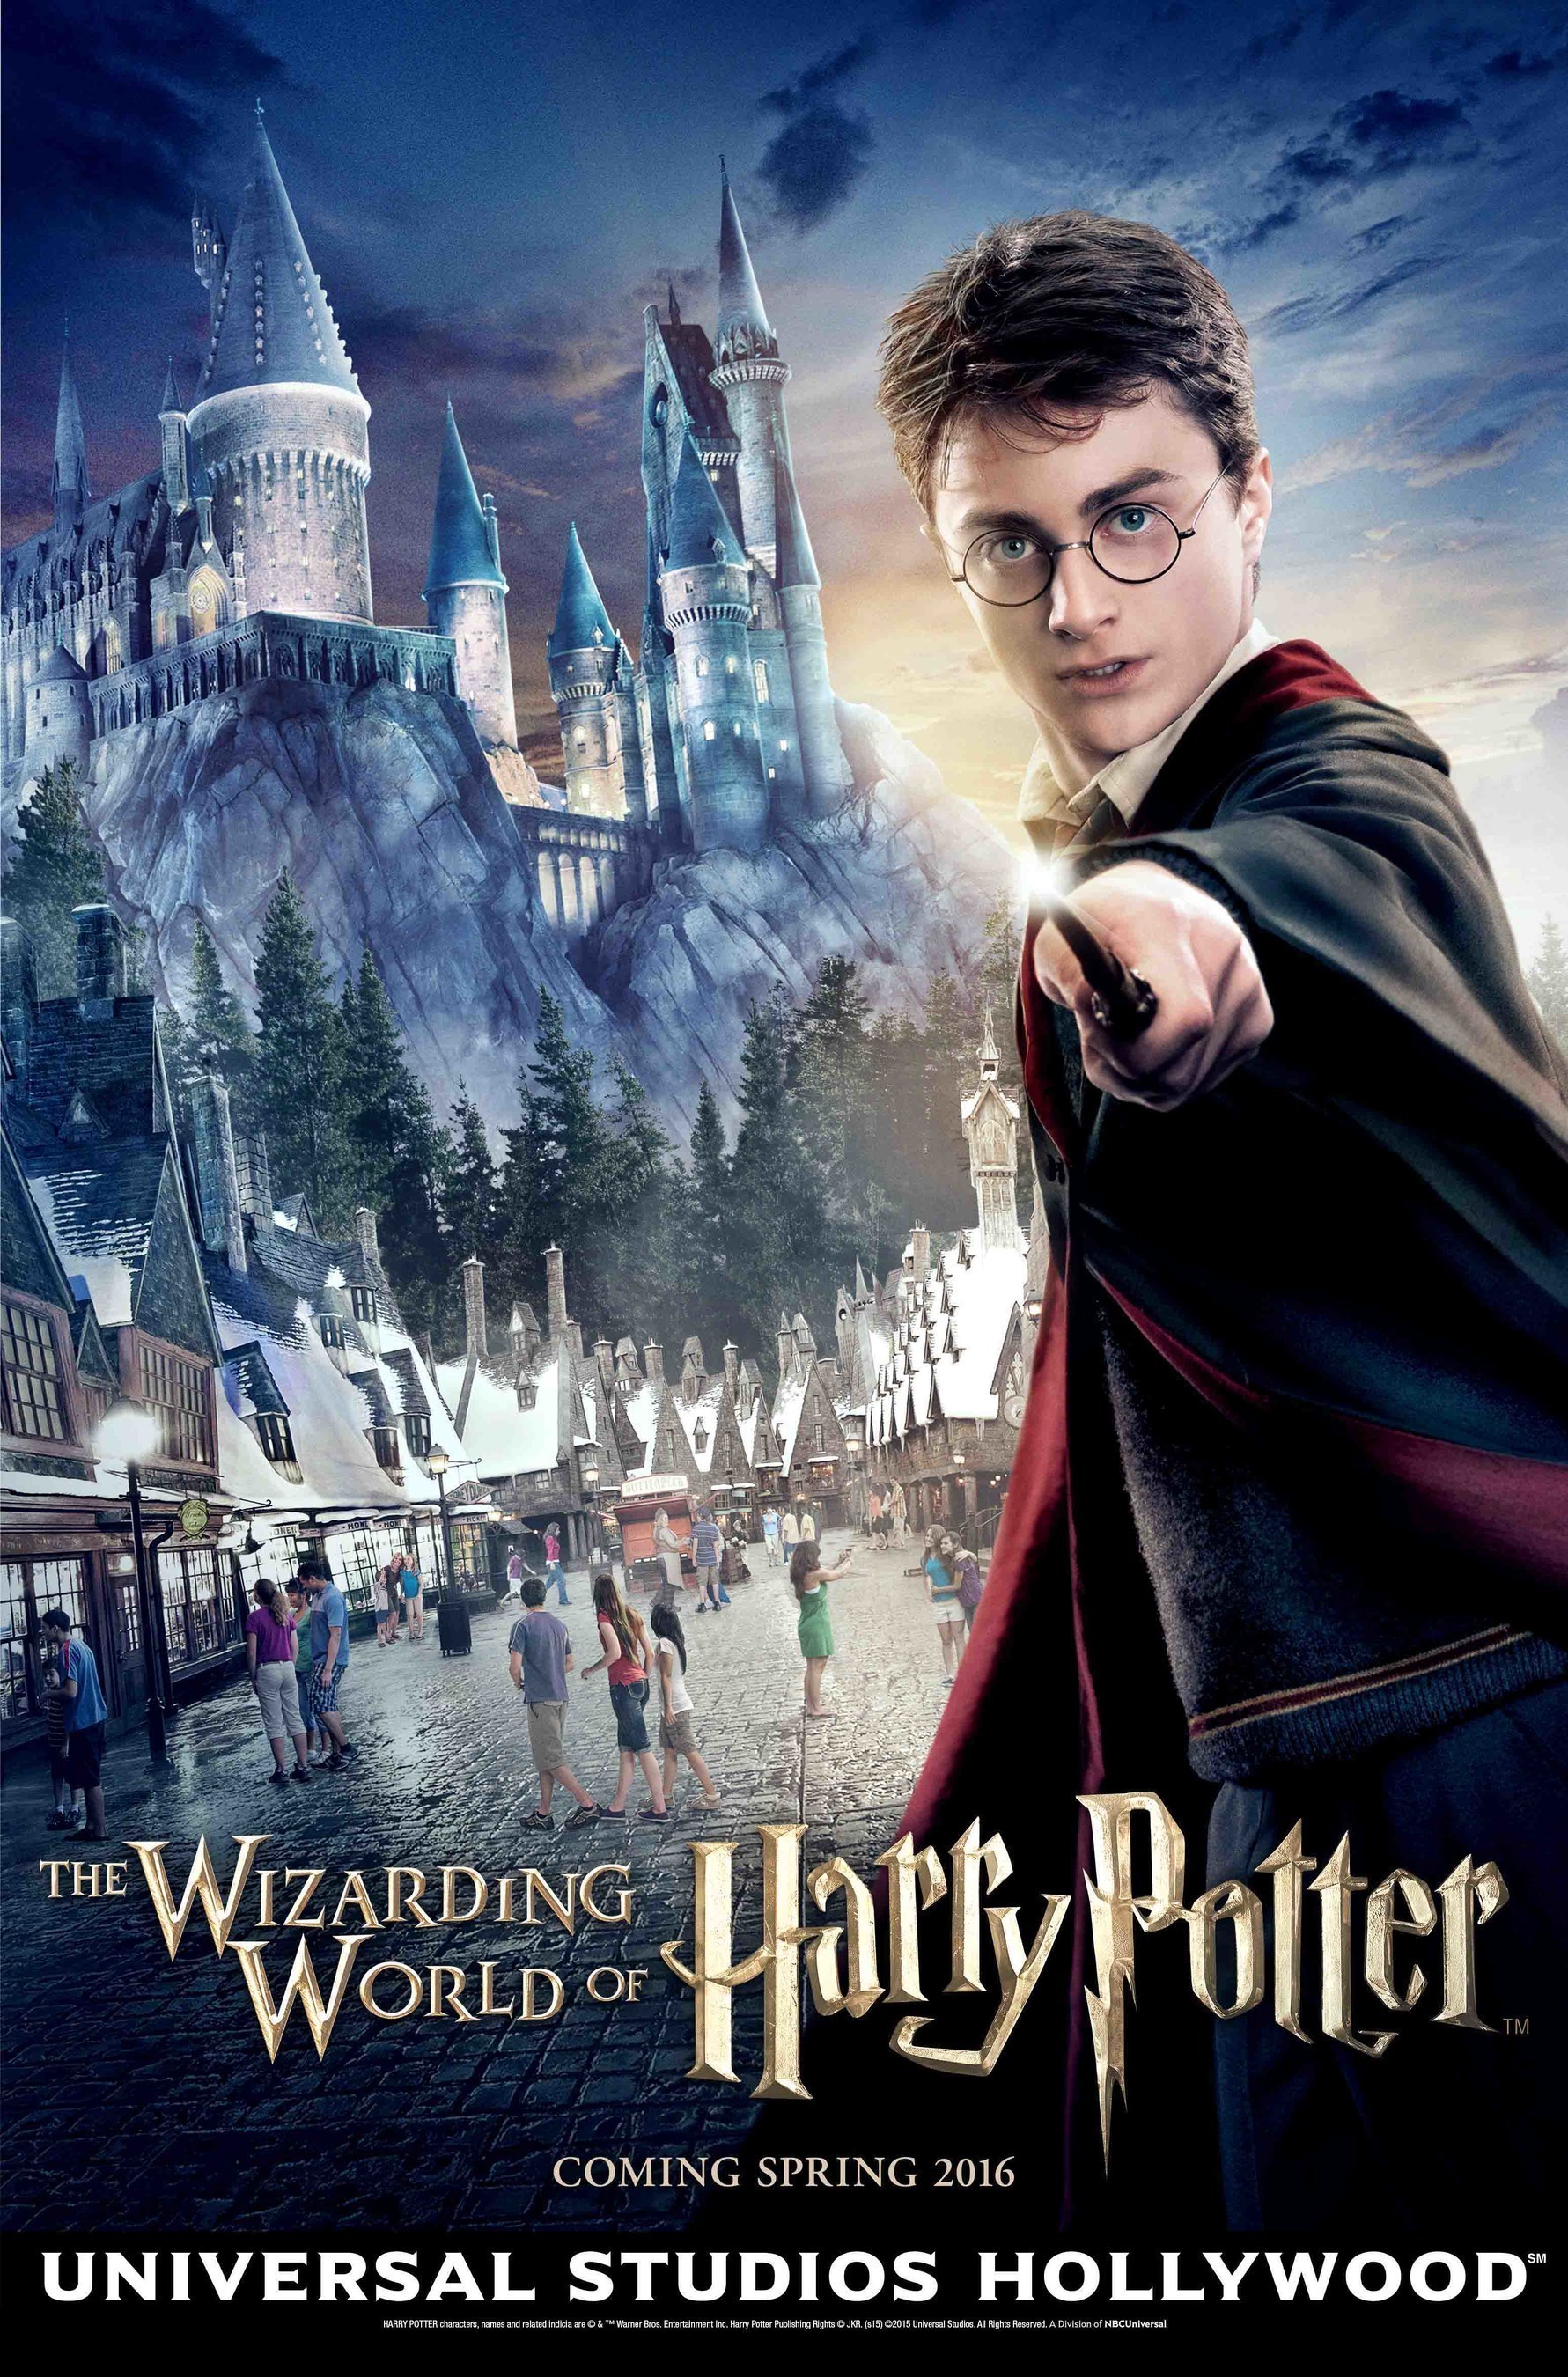 Universal Studios Hollywood launches the official website for "The Wizarding World of Harry Potter," opening in Spring 2016. HARRY POTTER, characters, names and related indicia are trademarks of and (C) Warner Bros. Entertainment Inc. Harry Potter Publishing Rights (C) JKR. (s15) (C)2015 Universal Studios. All Rights Reserved.